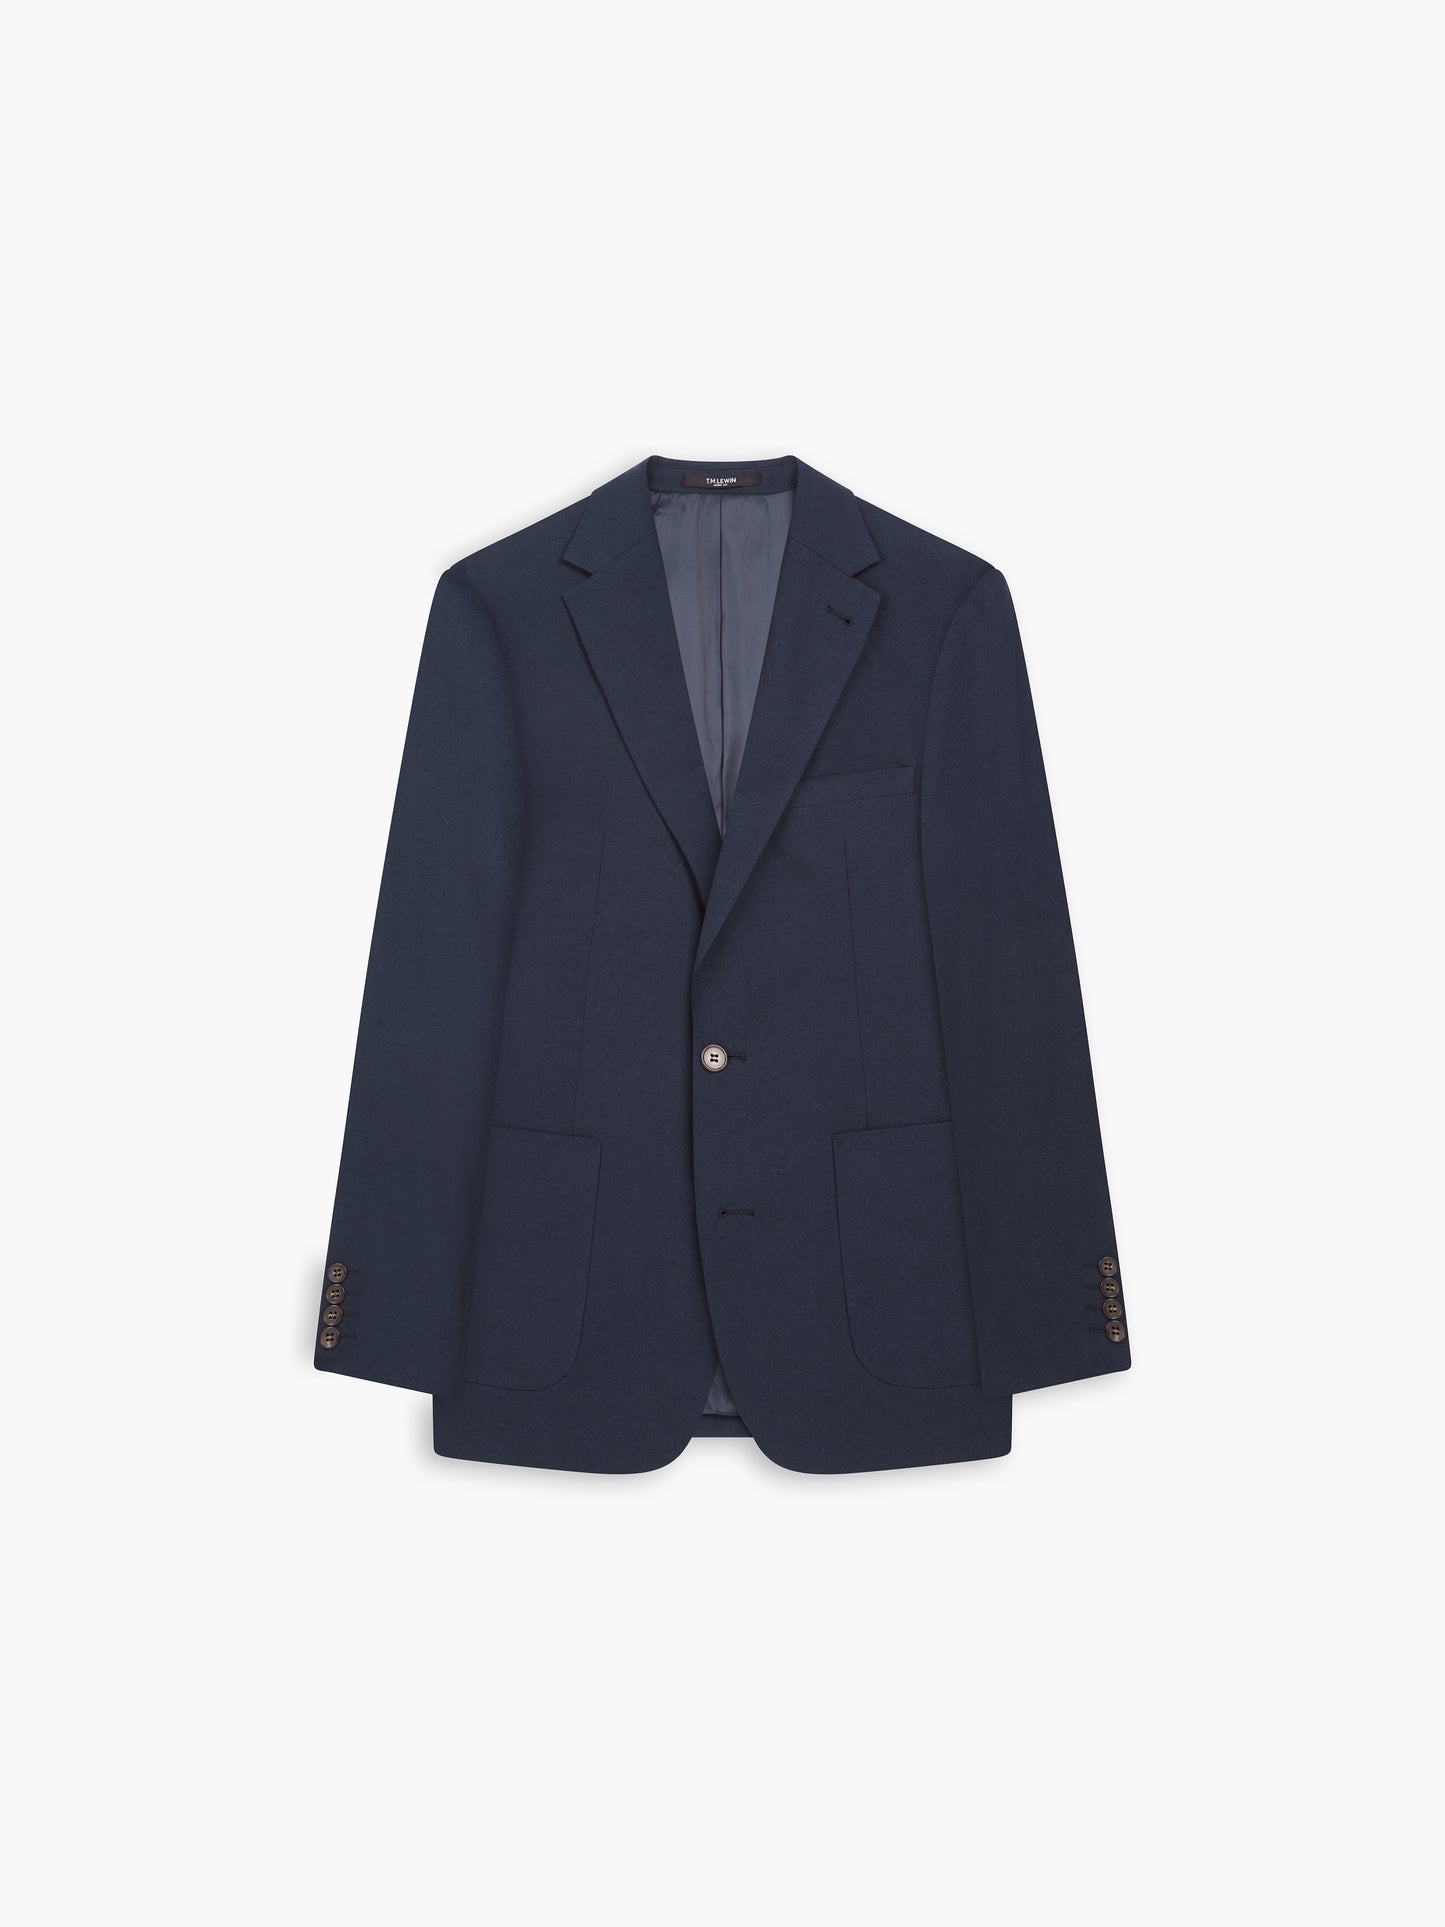 Piccadilly Linen Slim Navy Suit Jacket